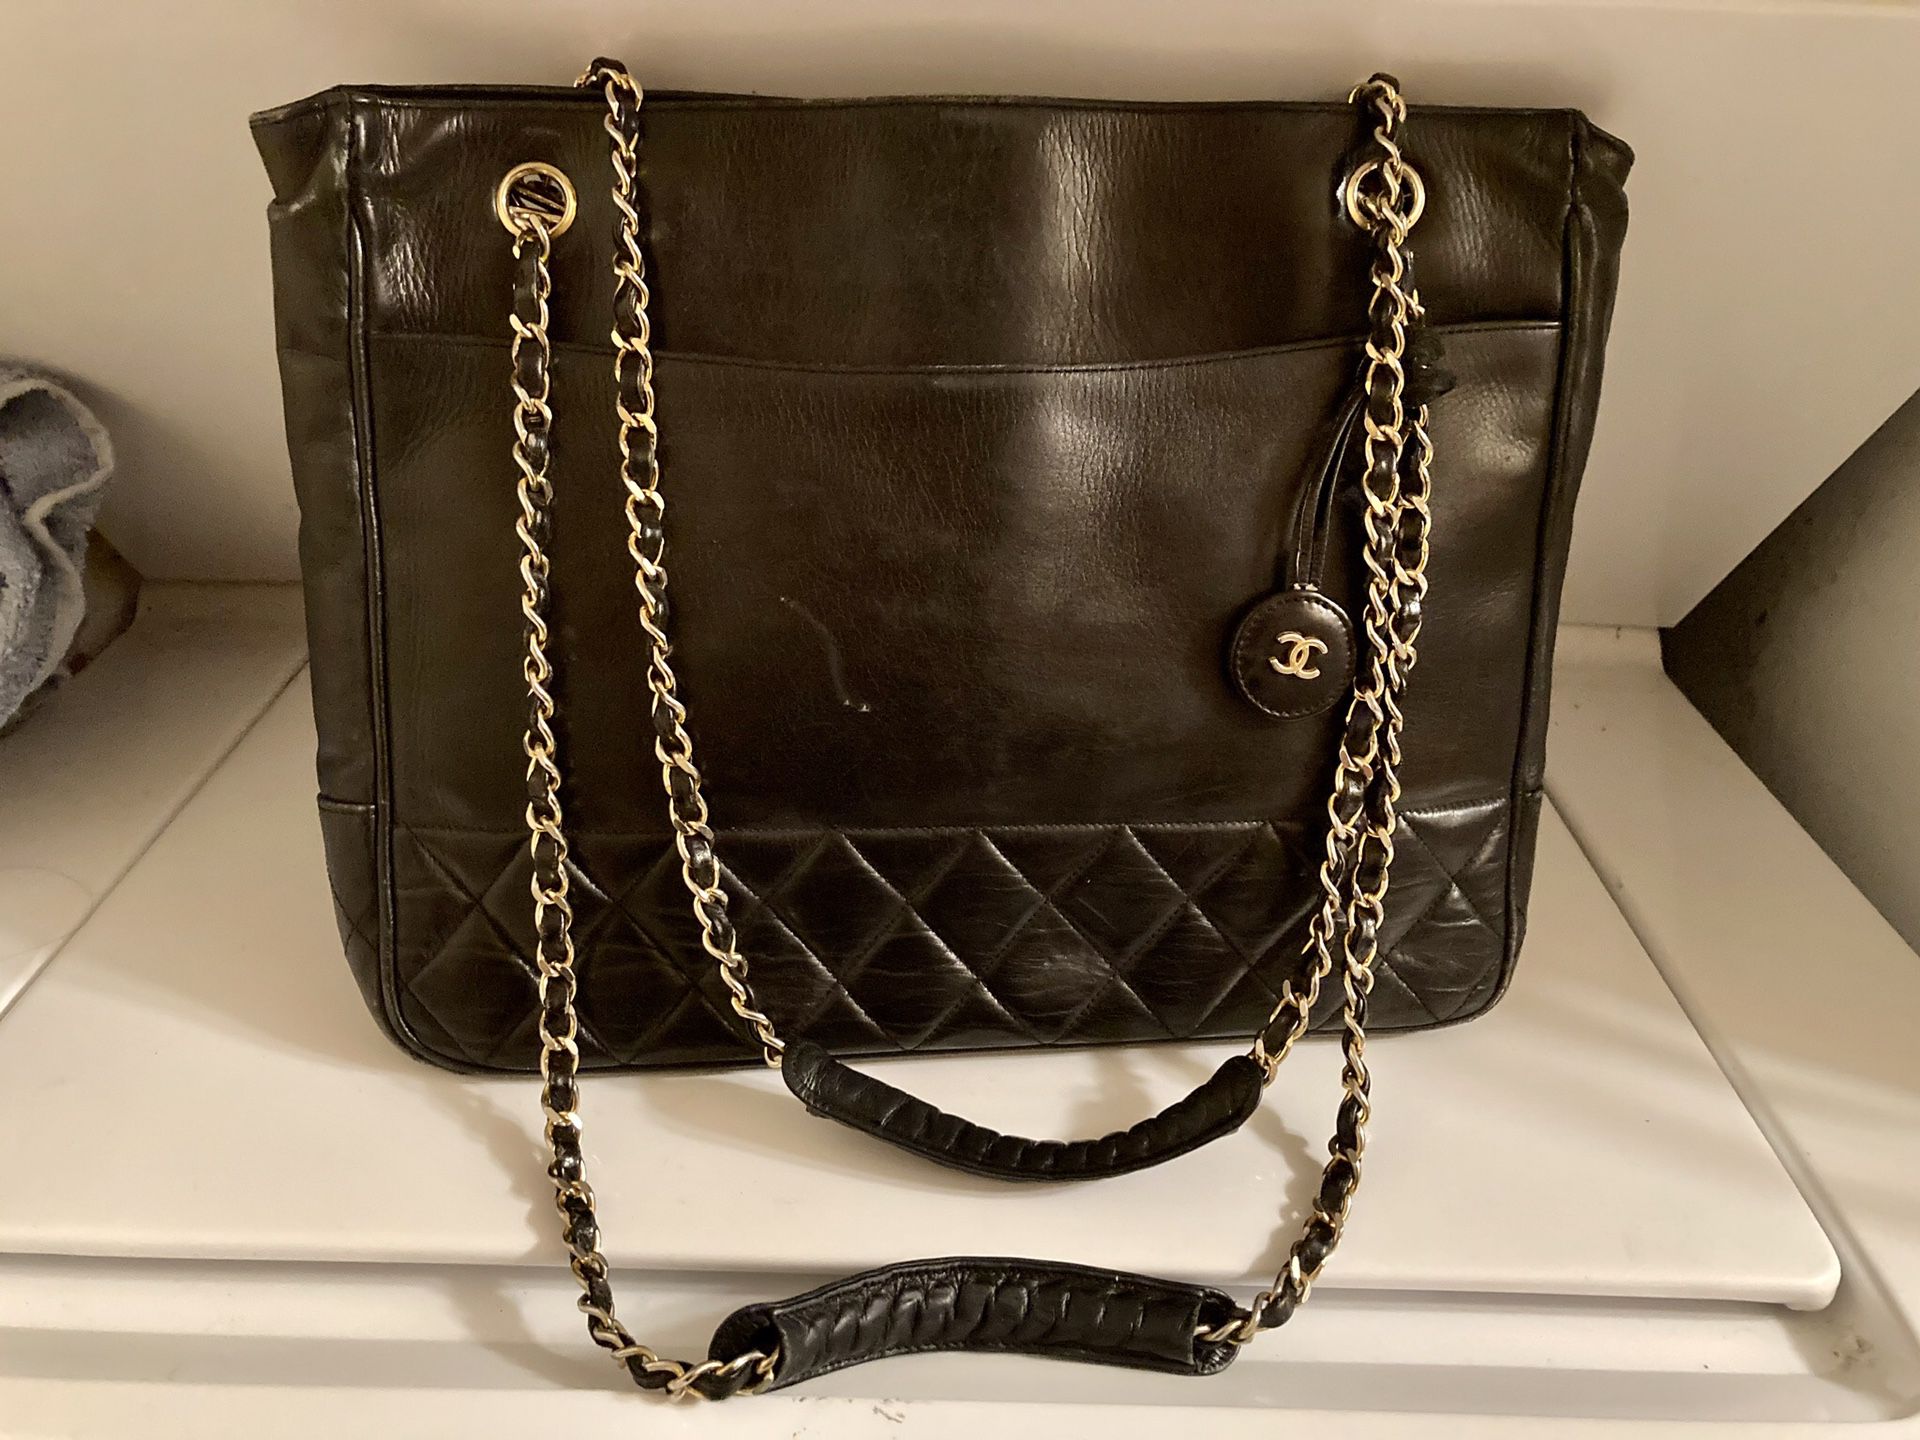 Authentic leather Chanel black bag